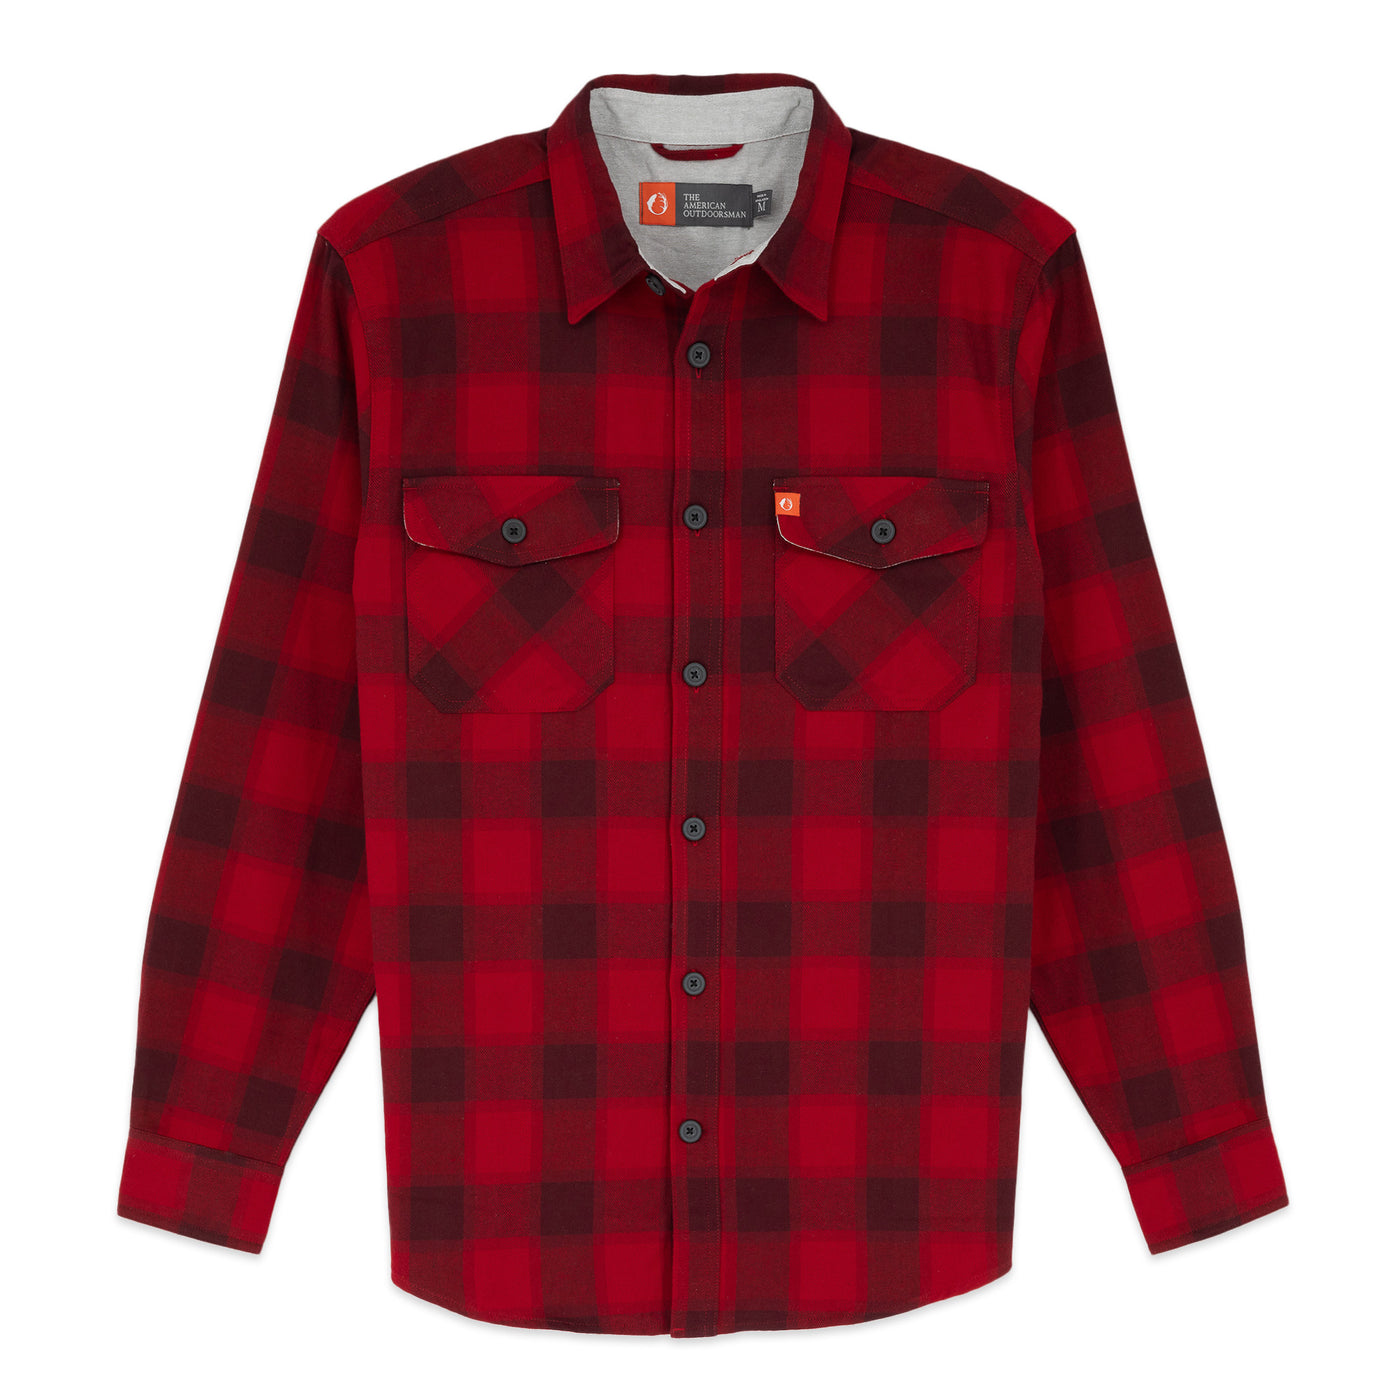 Heavyweight Flannel Shirt with Patch and Flap Pockets - The American Outdoorsman 